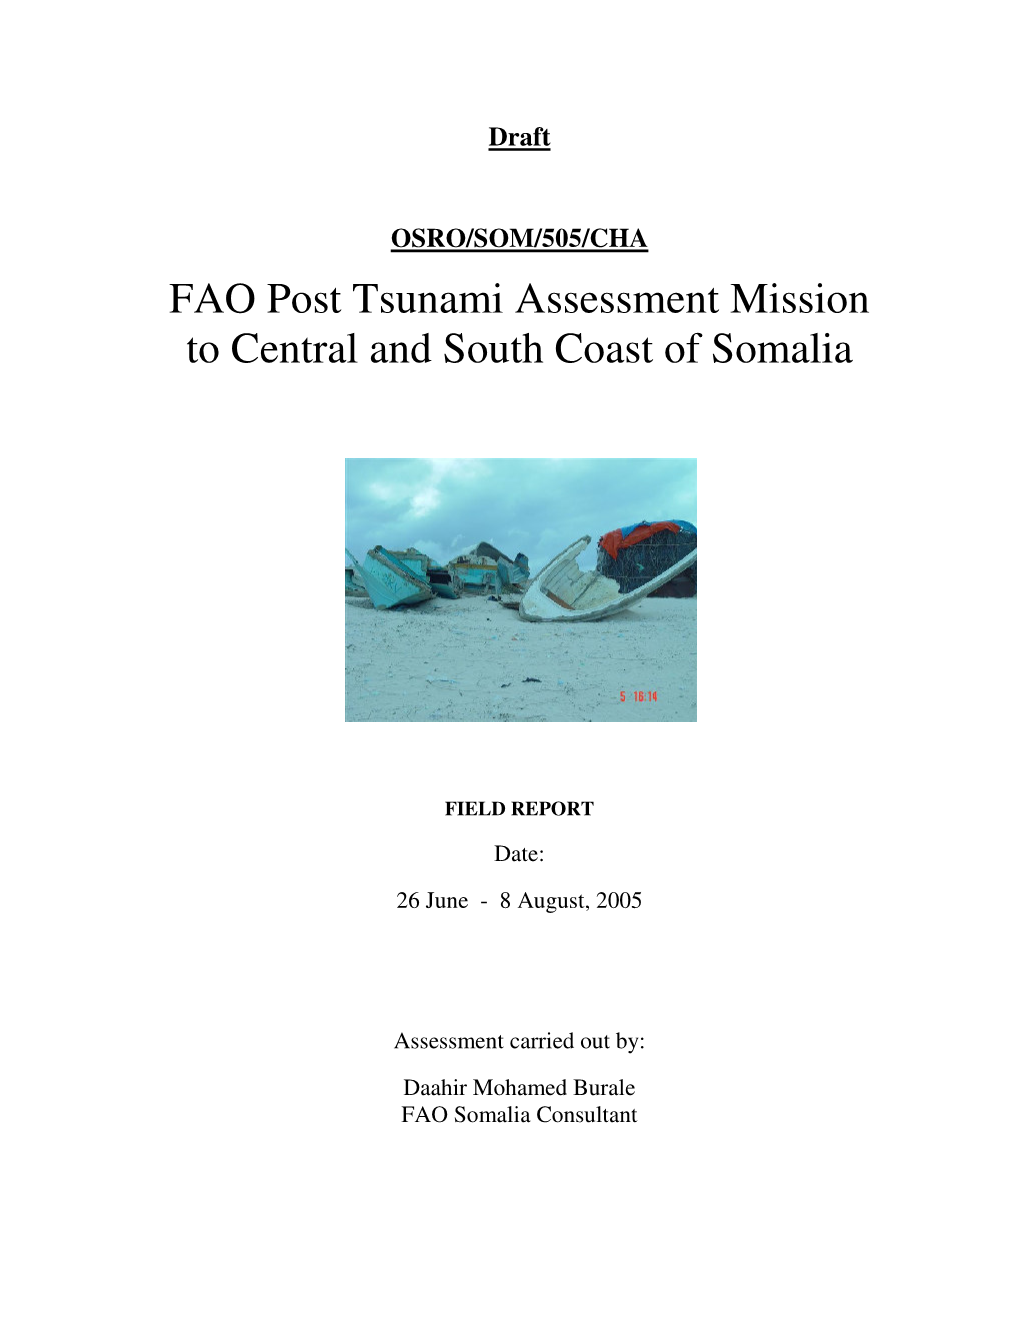 FAO Post Tsunami Assessment Mission to Central and South Coast of Somalia